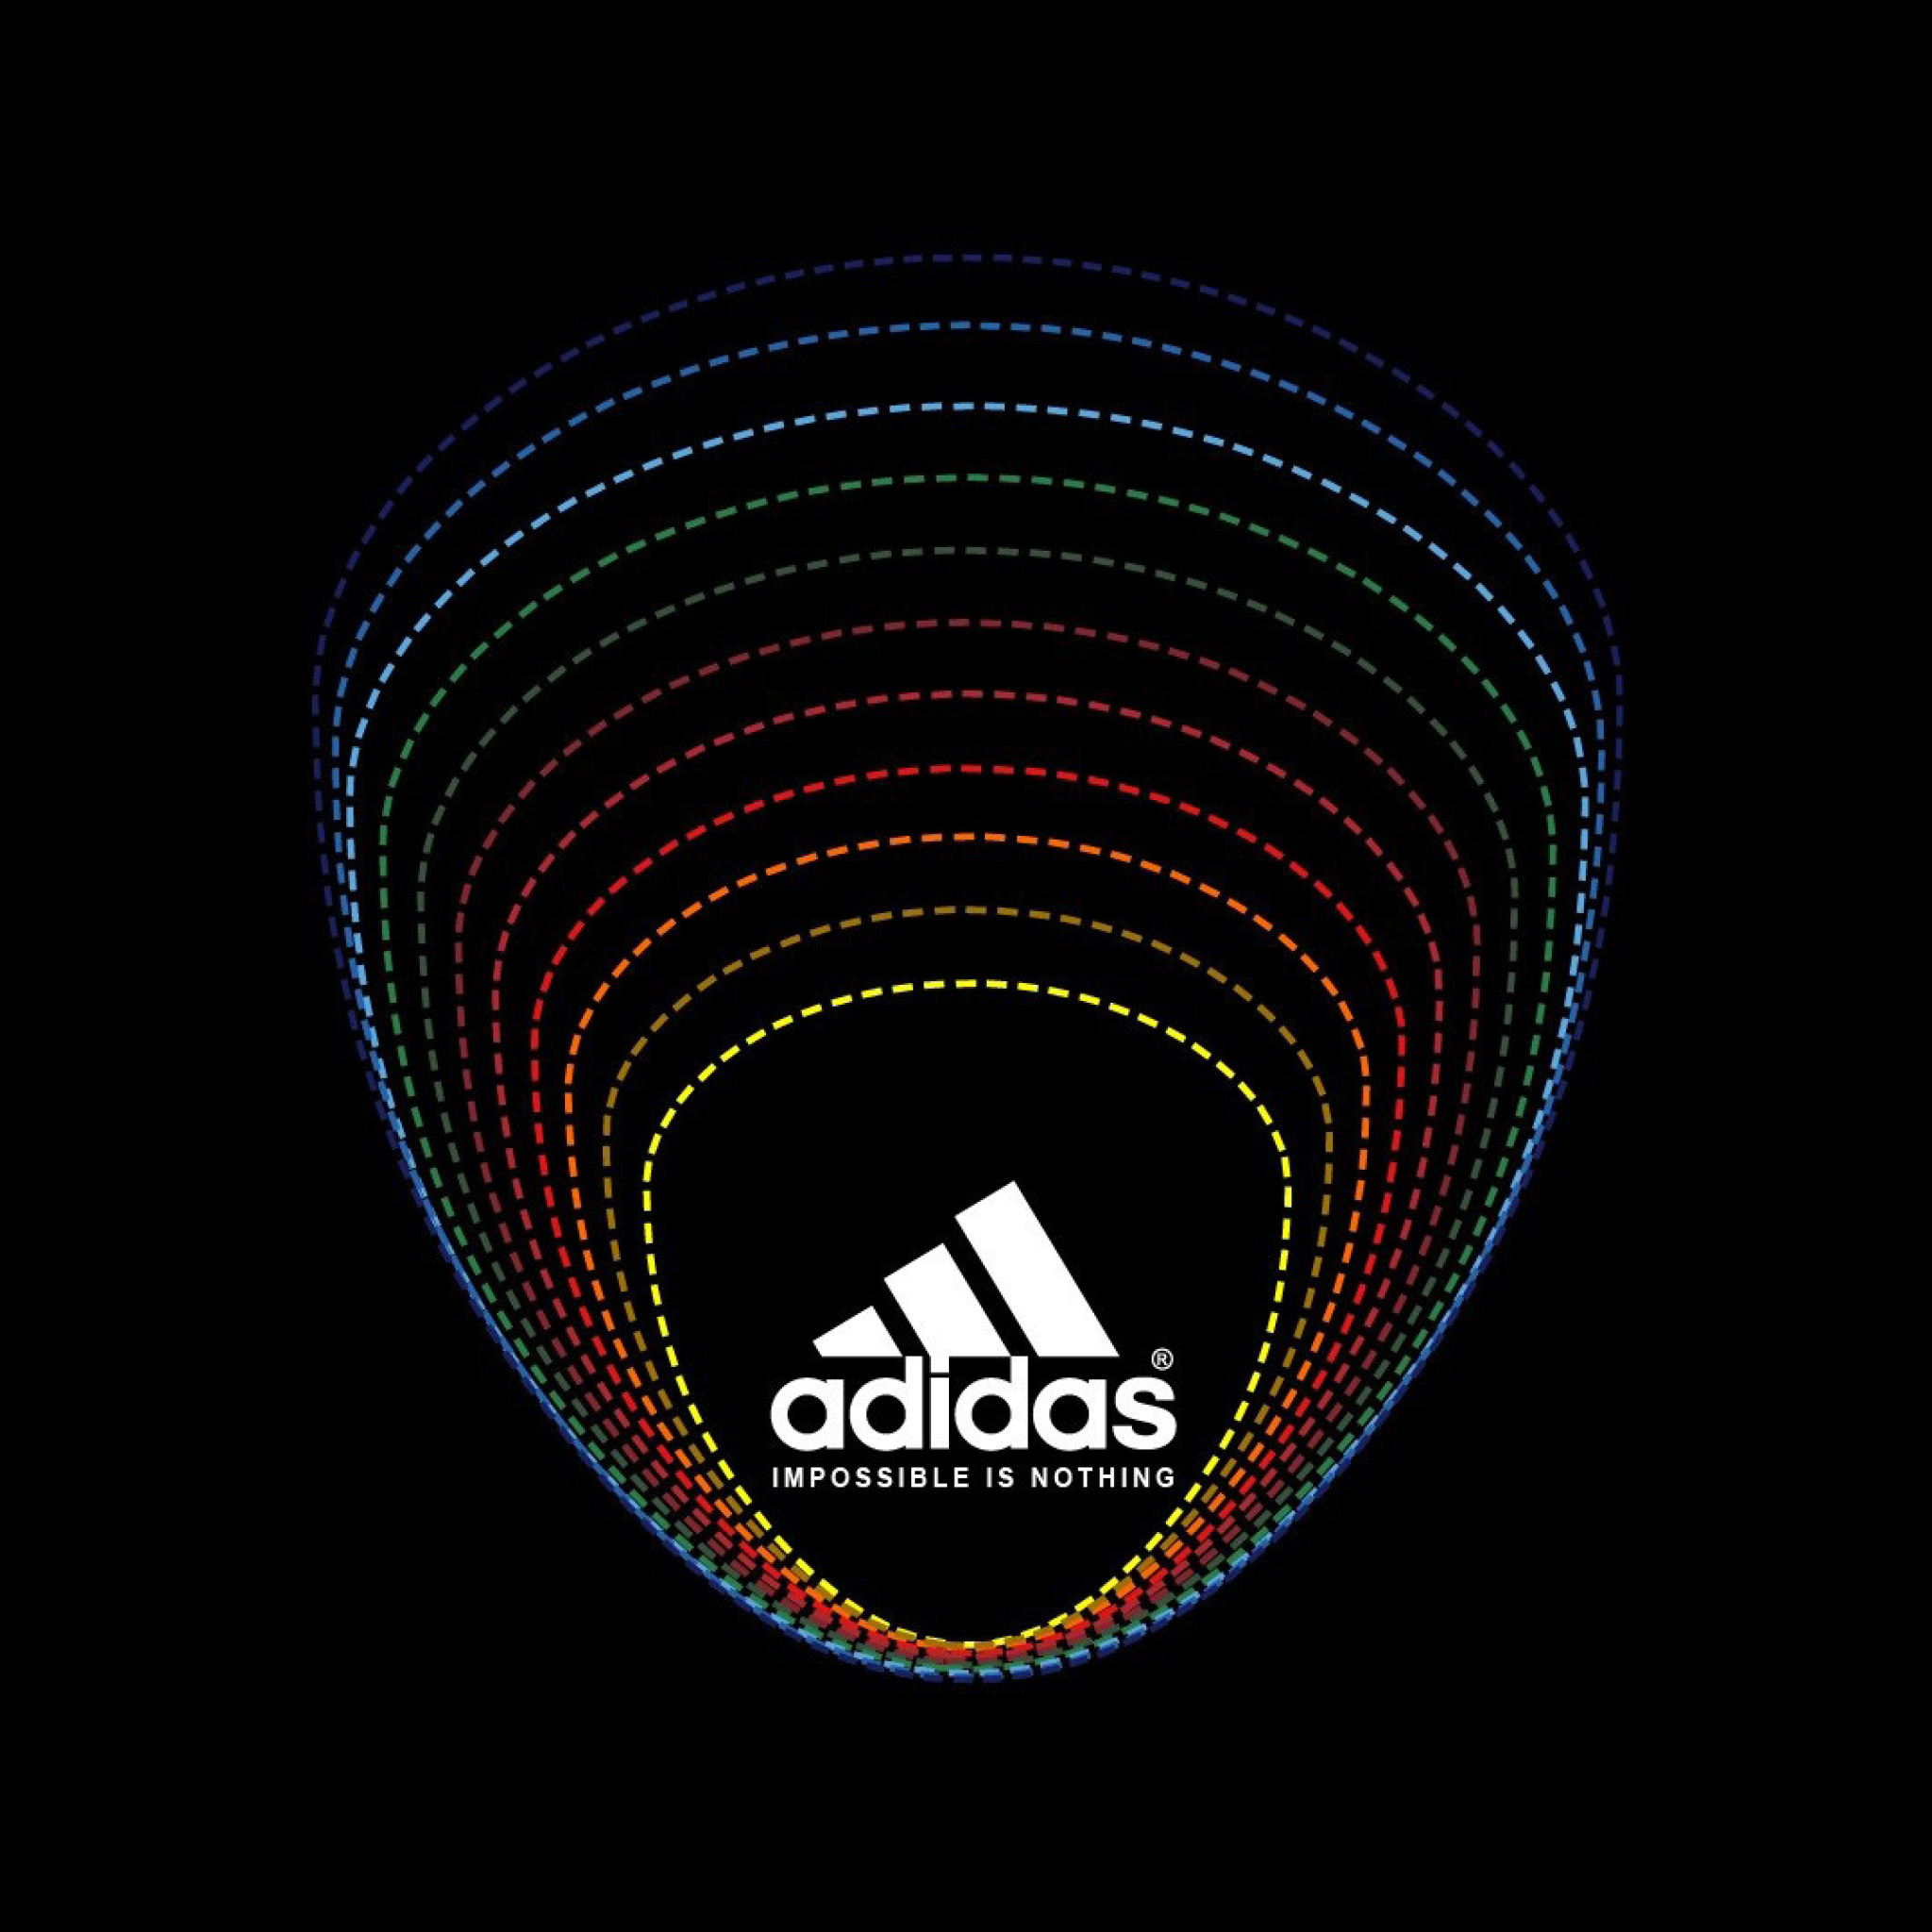 Adidas Tagline, Impossible is Nothing wallpaper 2048x2048